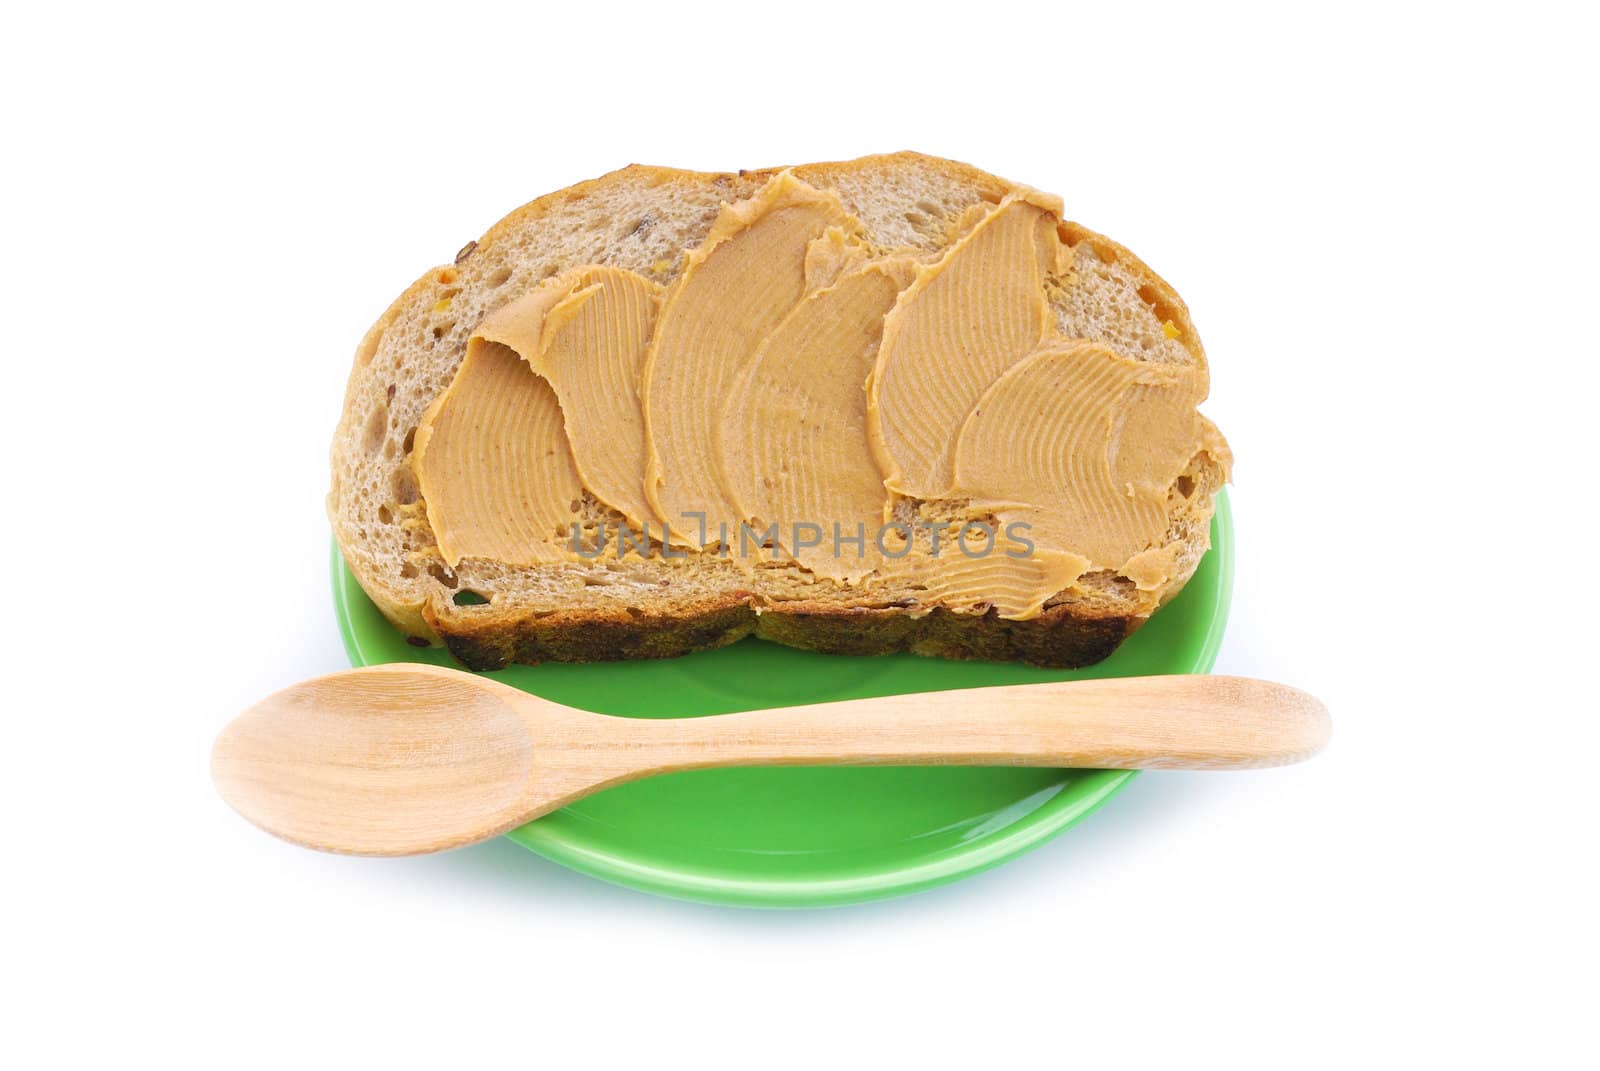 Peanut butter and whole grain , whole wheat bread by teen00000